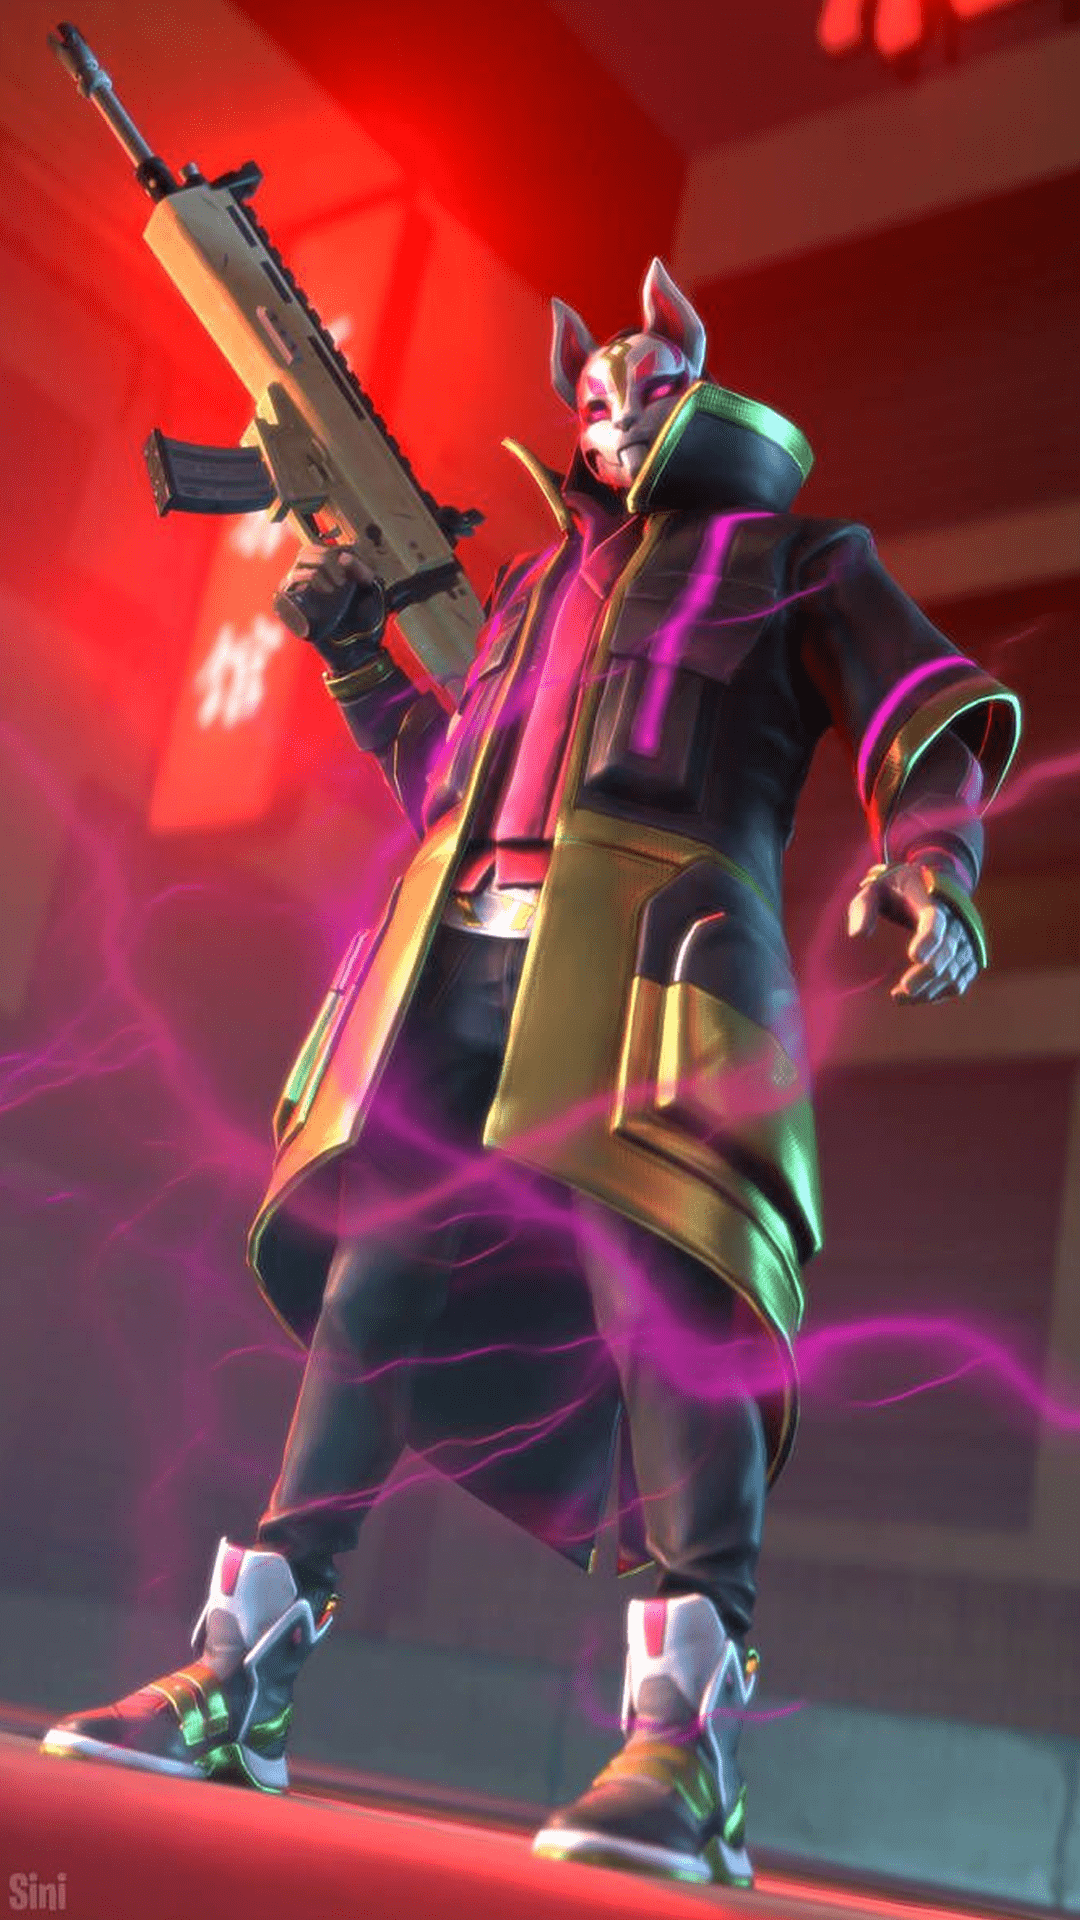 Download Fortnite wallpaper by Amanne - 34 - Free on ZEDGE™ now